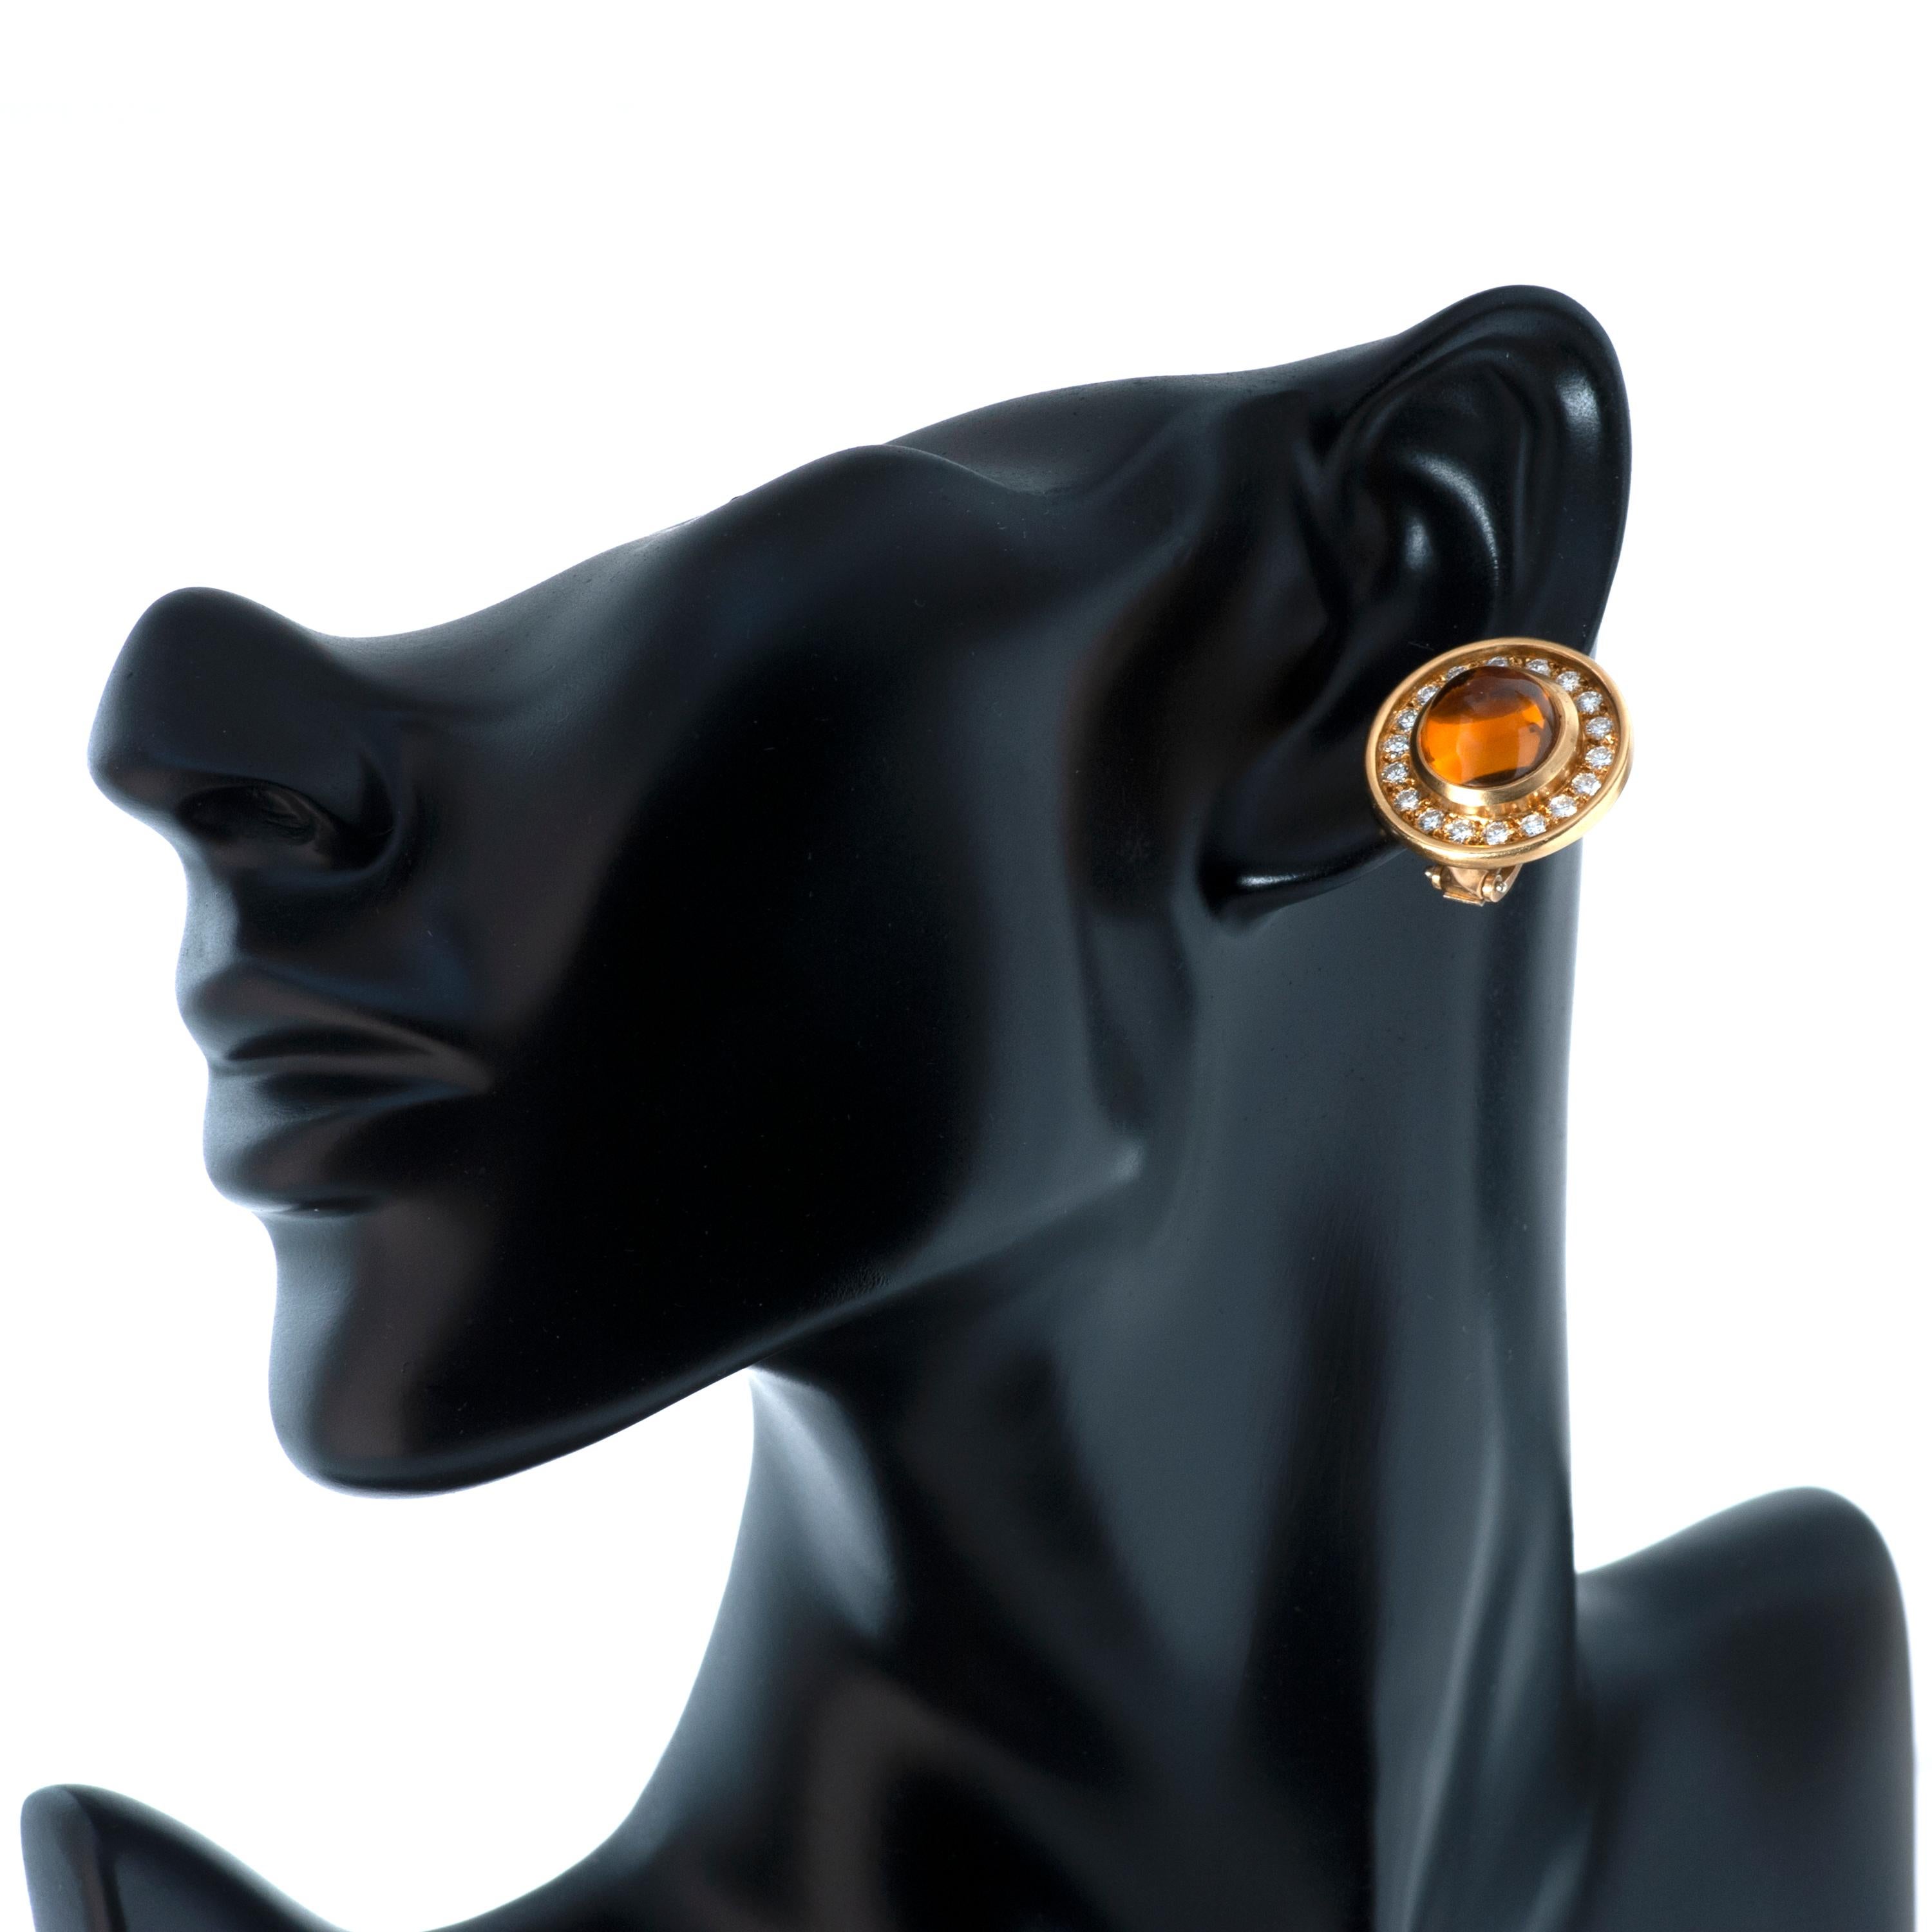 Barry Kieselstein-Cord 18k yellow gold diamond and citrine clip-on earrings.

These earrings feature 2 cabochon citrines weighing an approximate total of 5.20 carats, surrounded by 36 round brilliant cut diamonds totaling approximately 1.26 carats. 